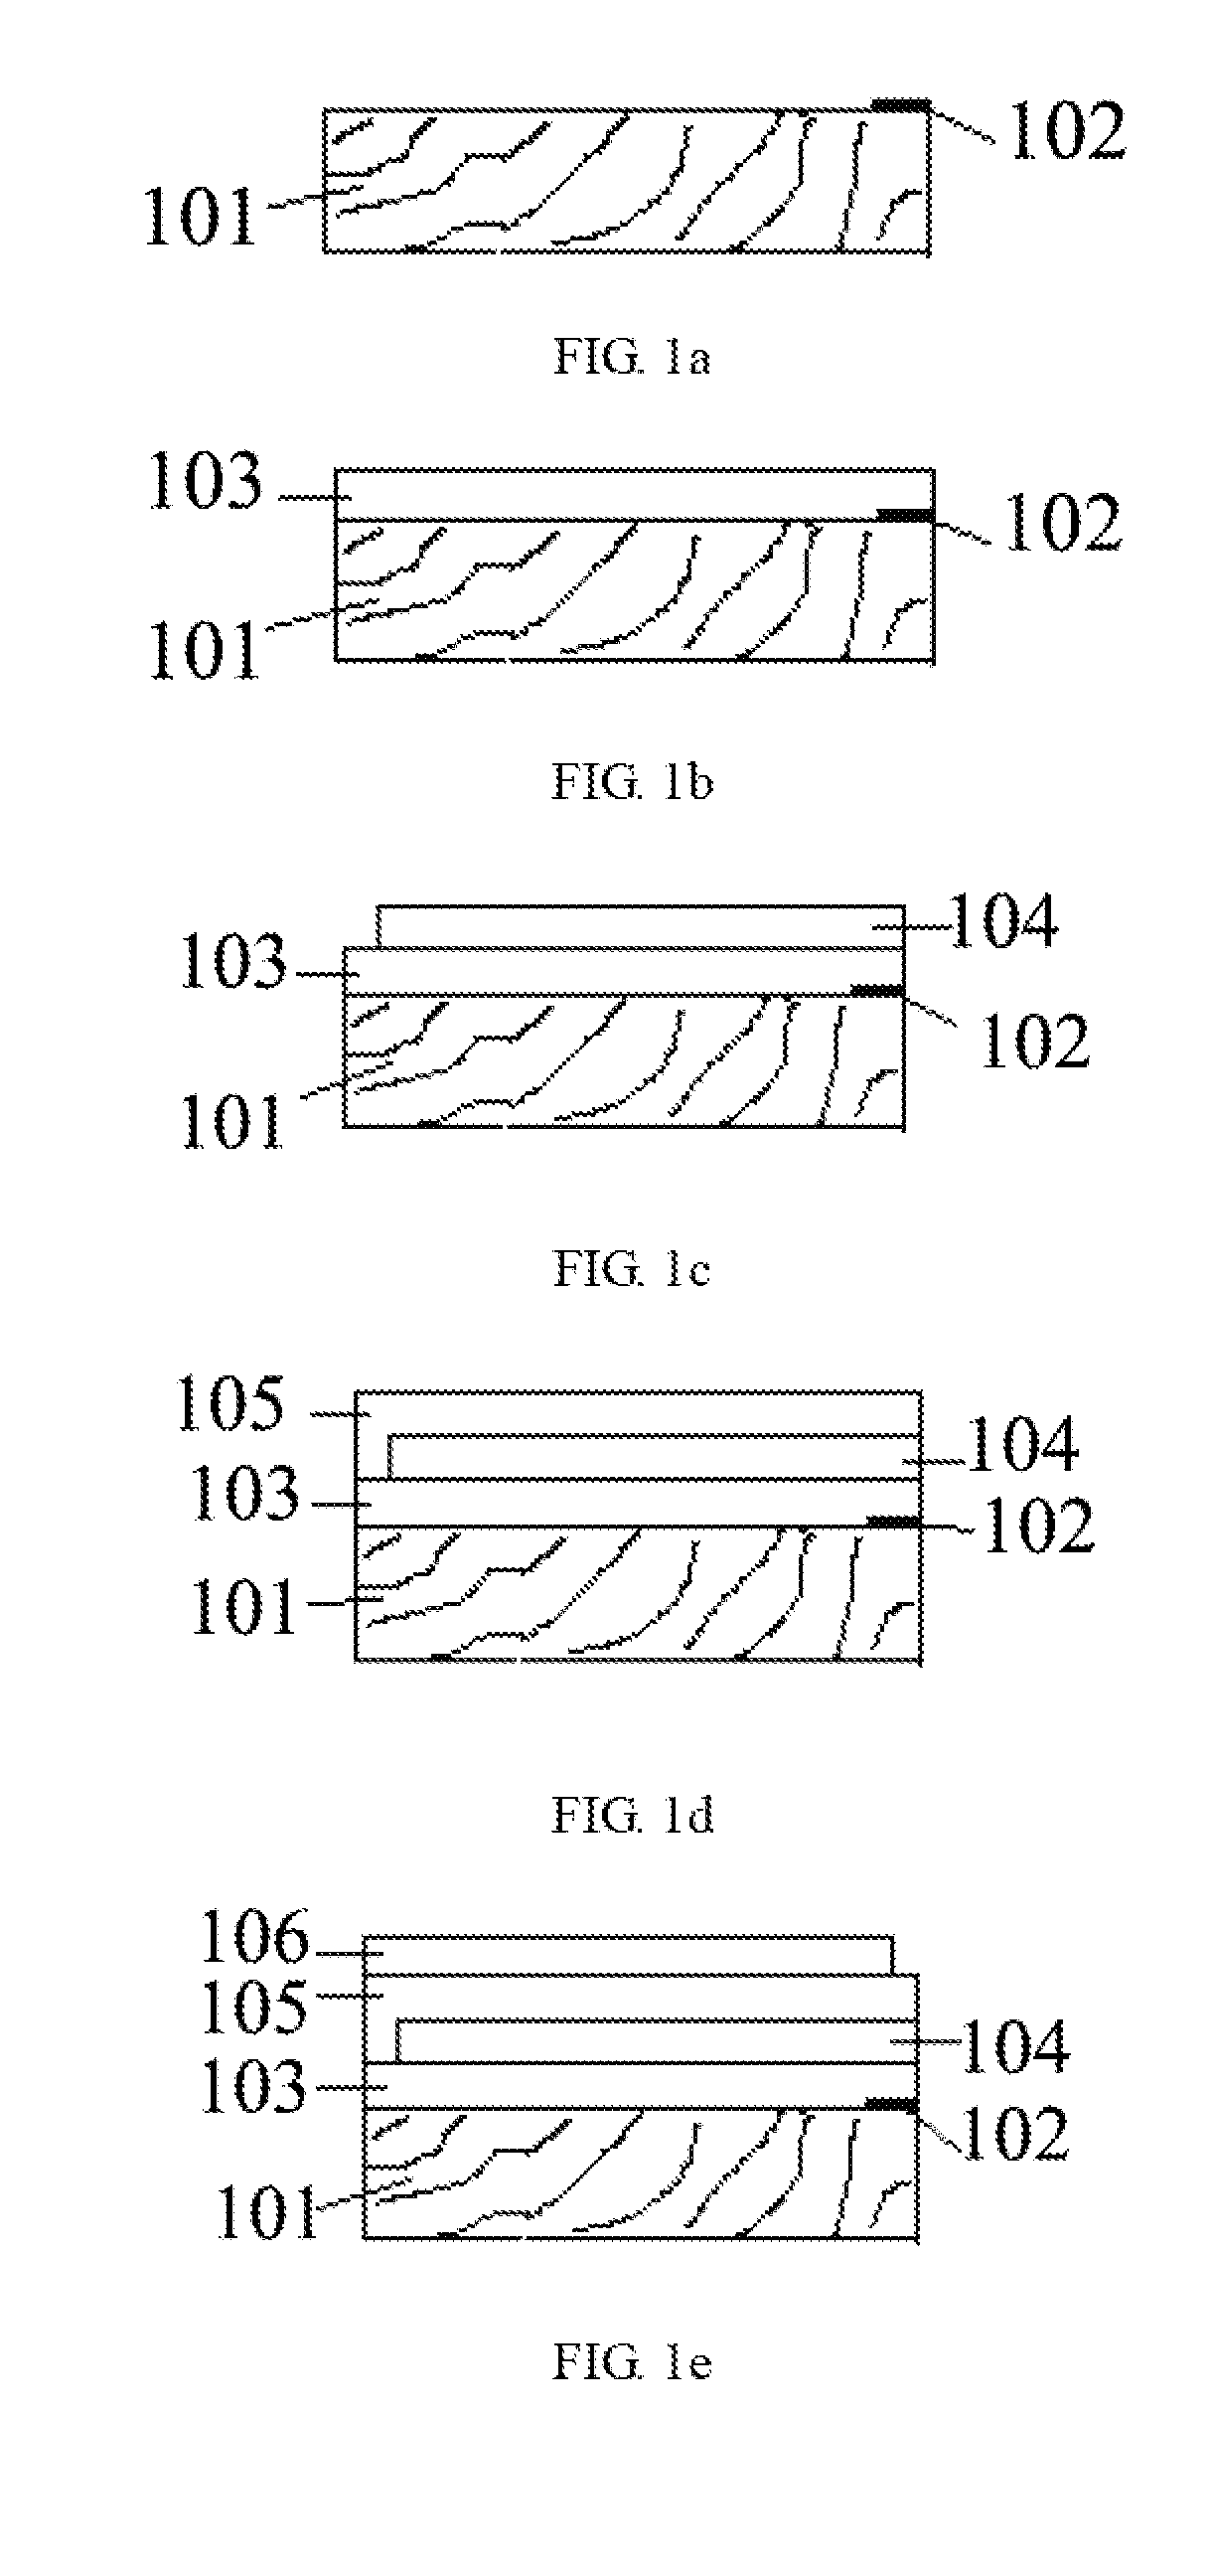 Thin-film thermo-electric generator and fabrication method thereof